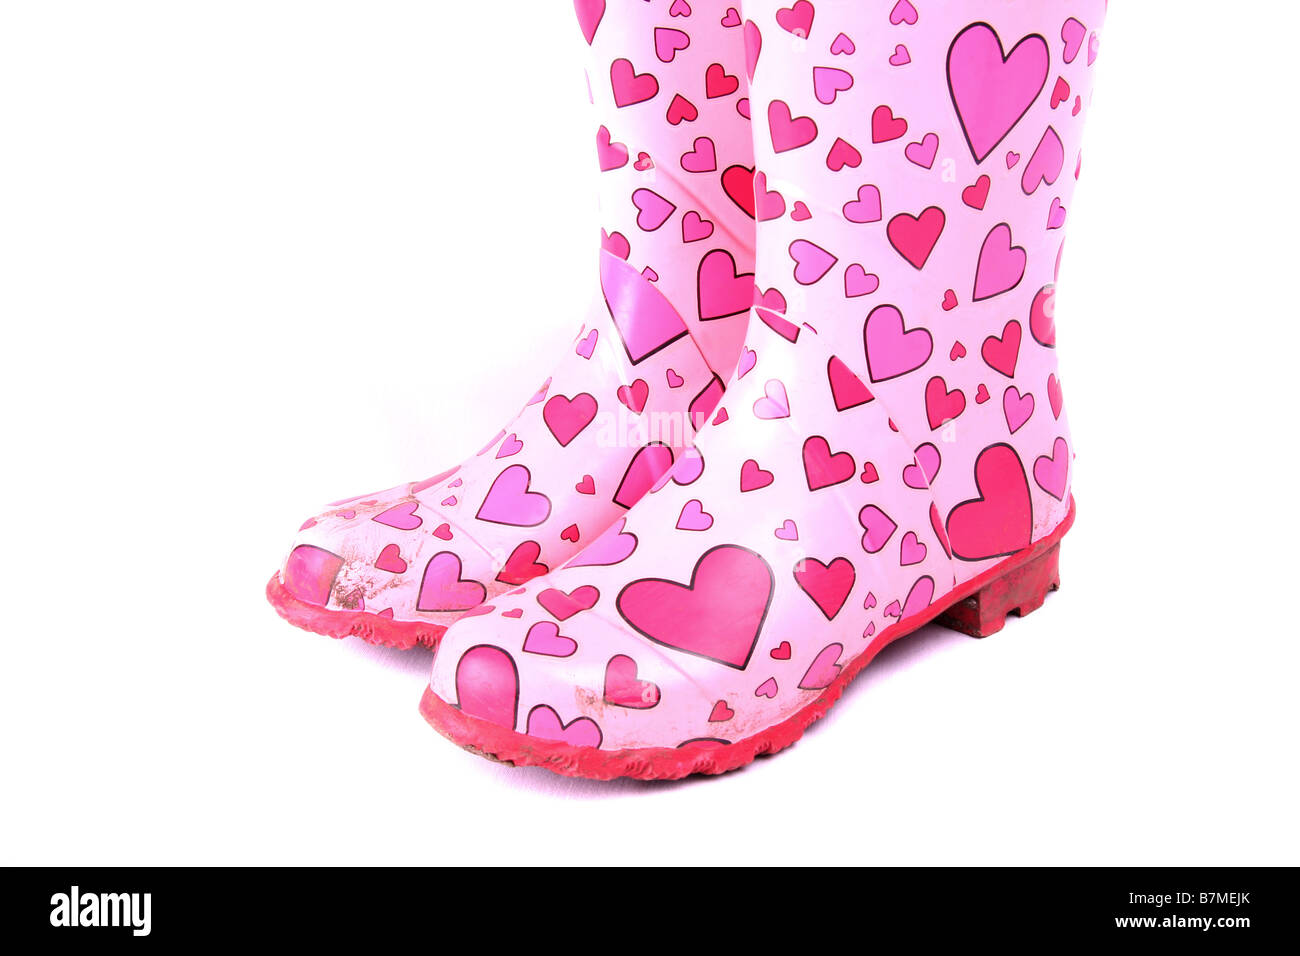 Cutout of a pair of wellies with pink hearts on them Stock Photo